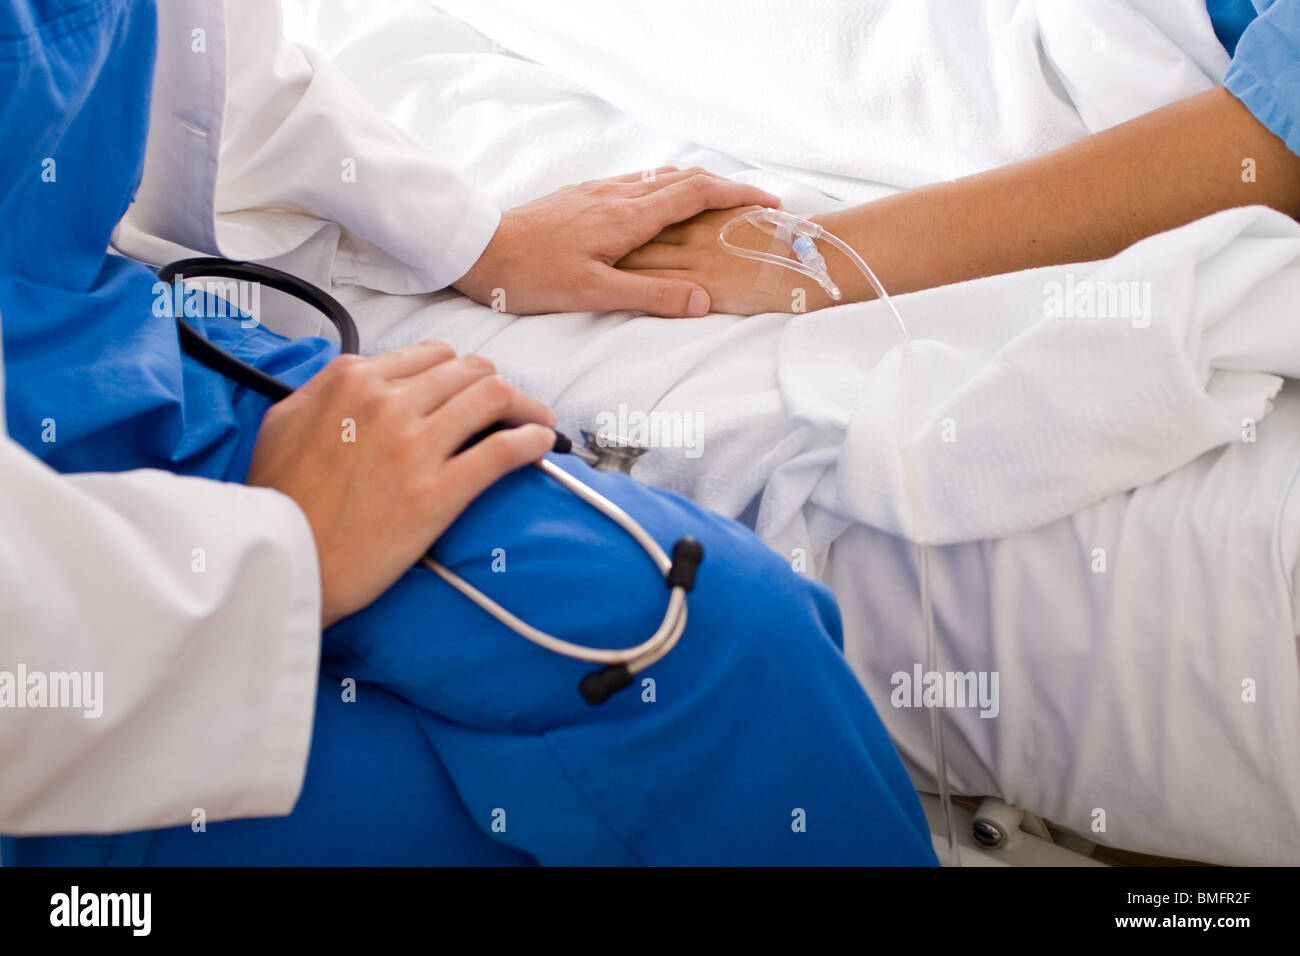 caring doctor comforting hospitalized patient Stock Photo